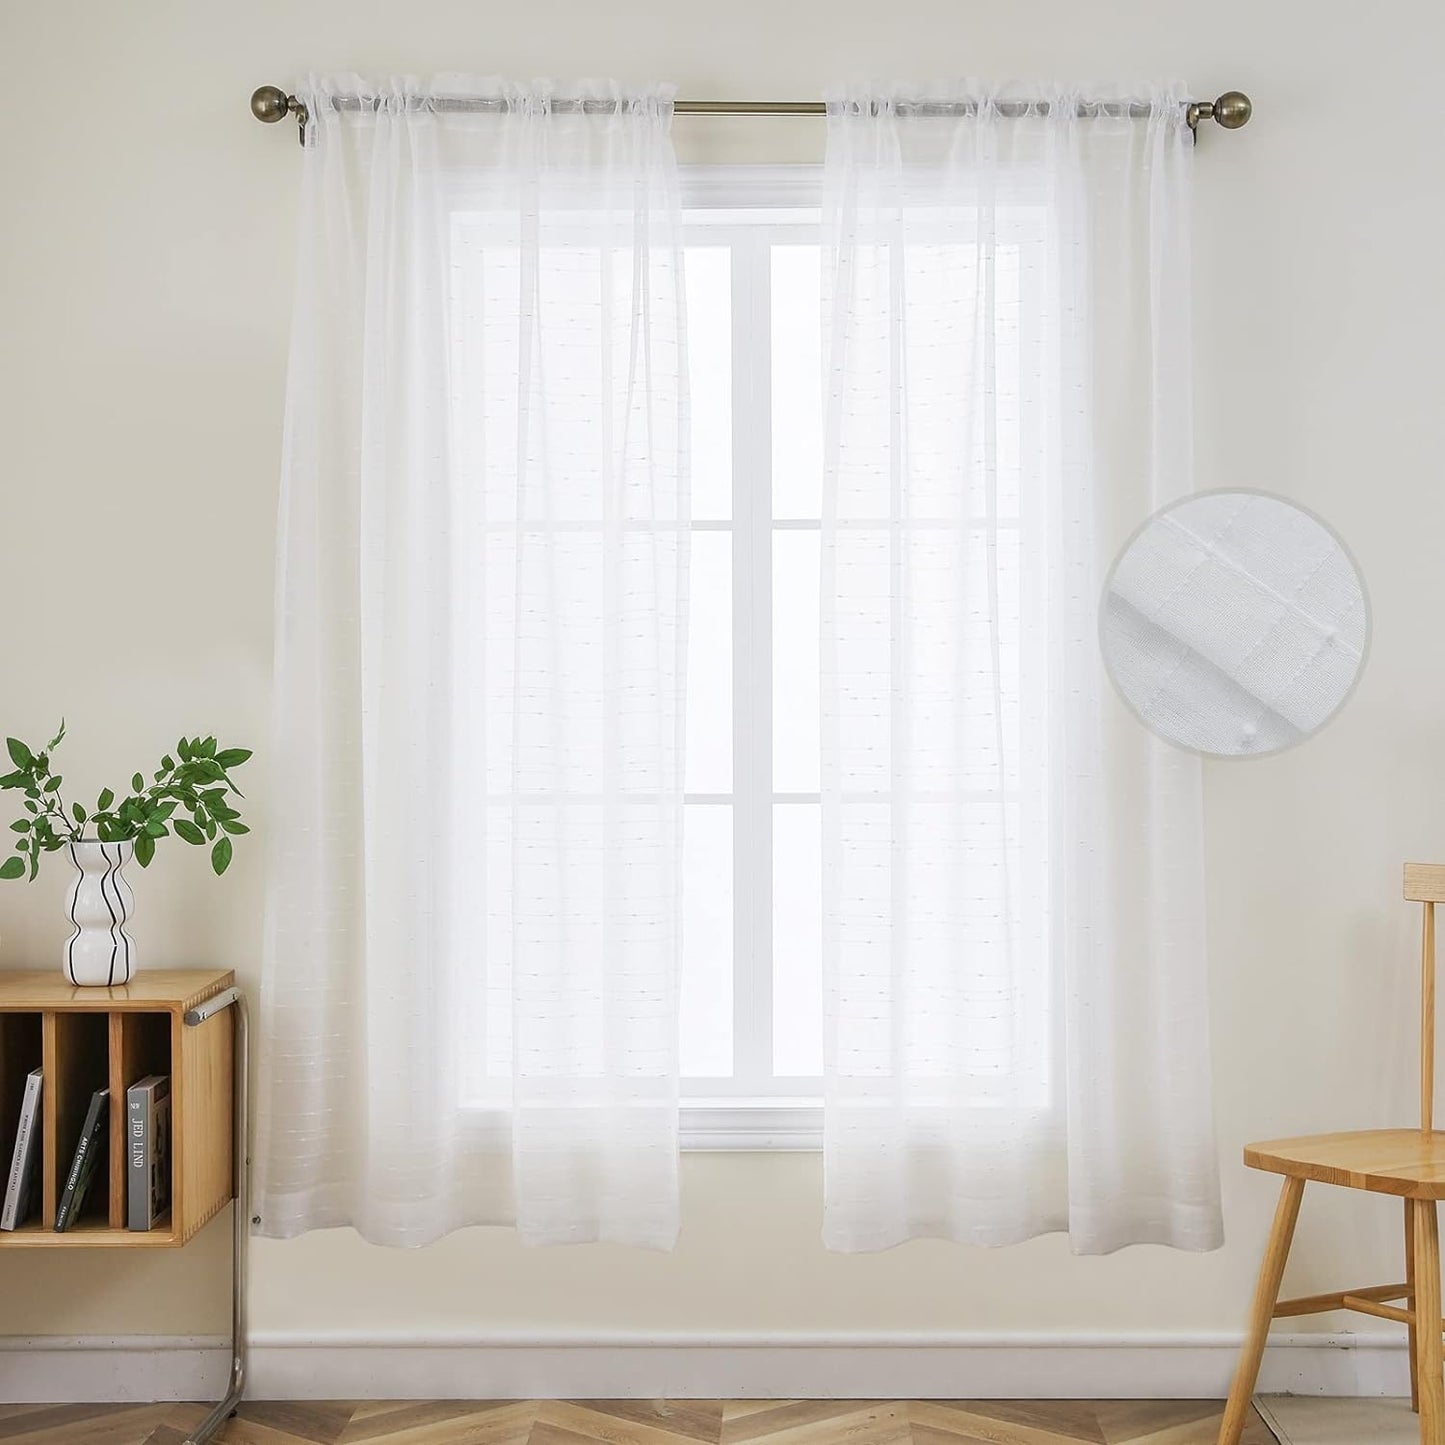 Joydeco White Sheer Curtains 63 Inch Length 2 Panels Set, Rod Pocket Long Sheer Curtains for Window Bedroom Living Room, Lightweight Semi Drape Panels for Yard Patio (54X63 Inch, off White)  Joydeco Solid Color-White 54W X 63L Inch X 2 Panels 